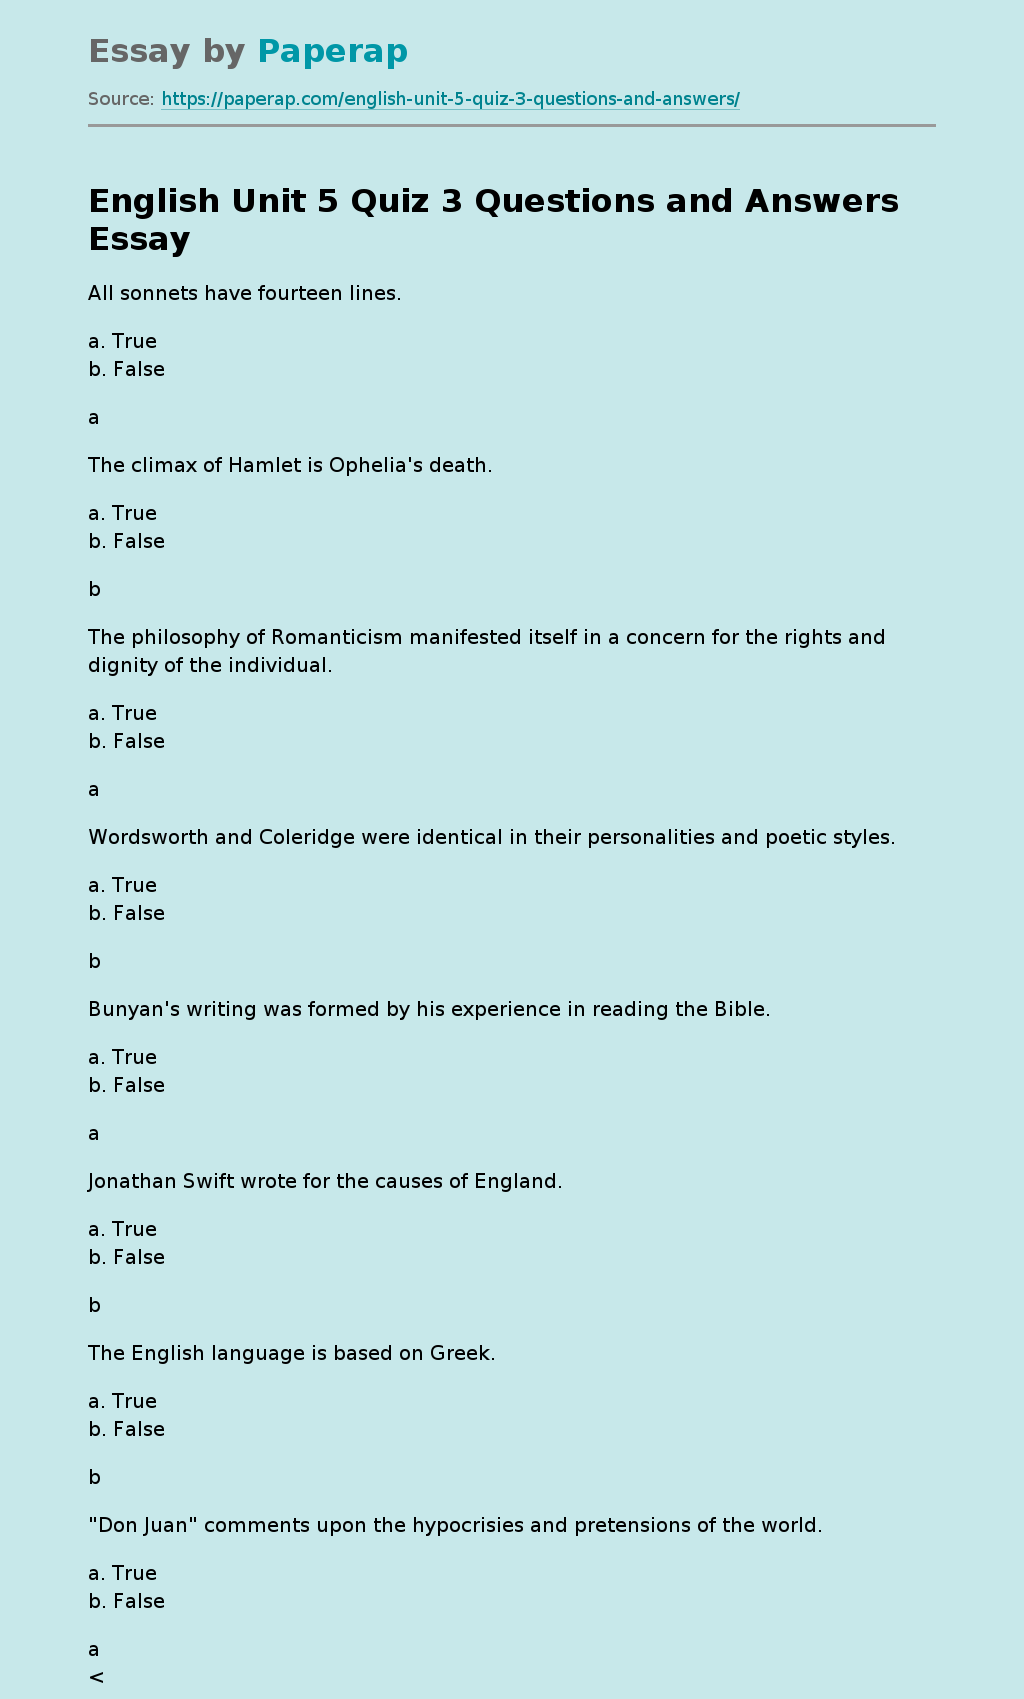 English Unit 5 Quiz 3 Questions and Answers